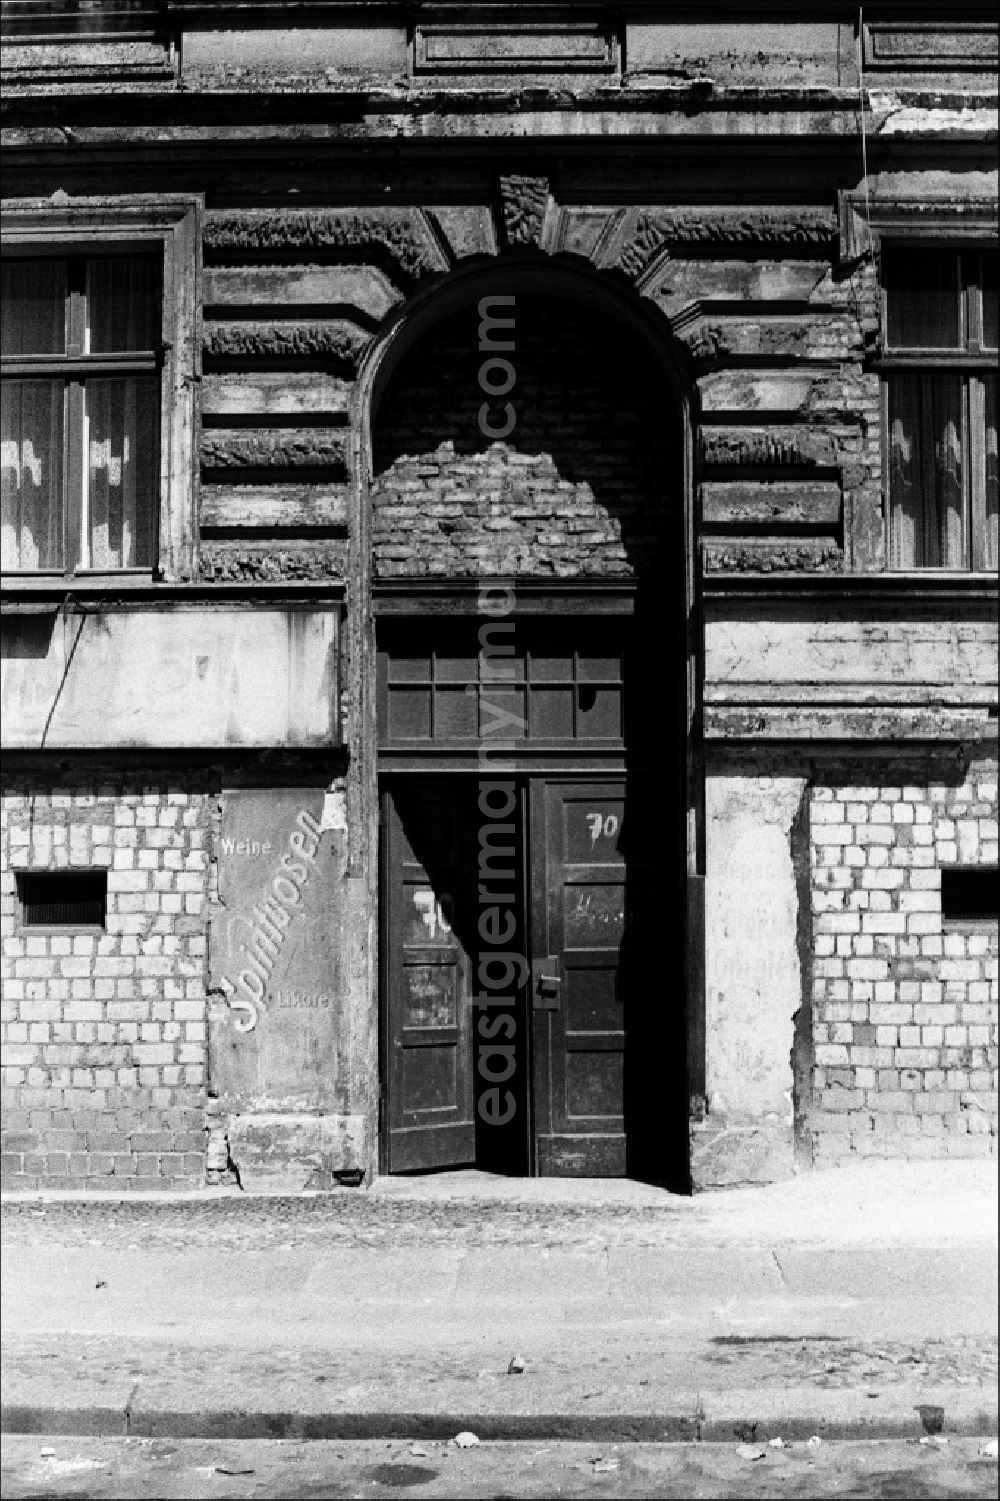 GDR photo archive: Berlin - Facades and gables in Mitte and Prenzlauer Berg in East Berlin on the territory of the former GDR, German Democratic Republic